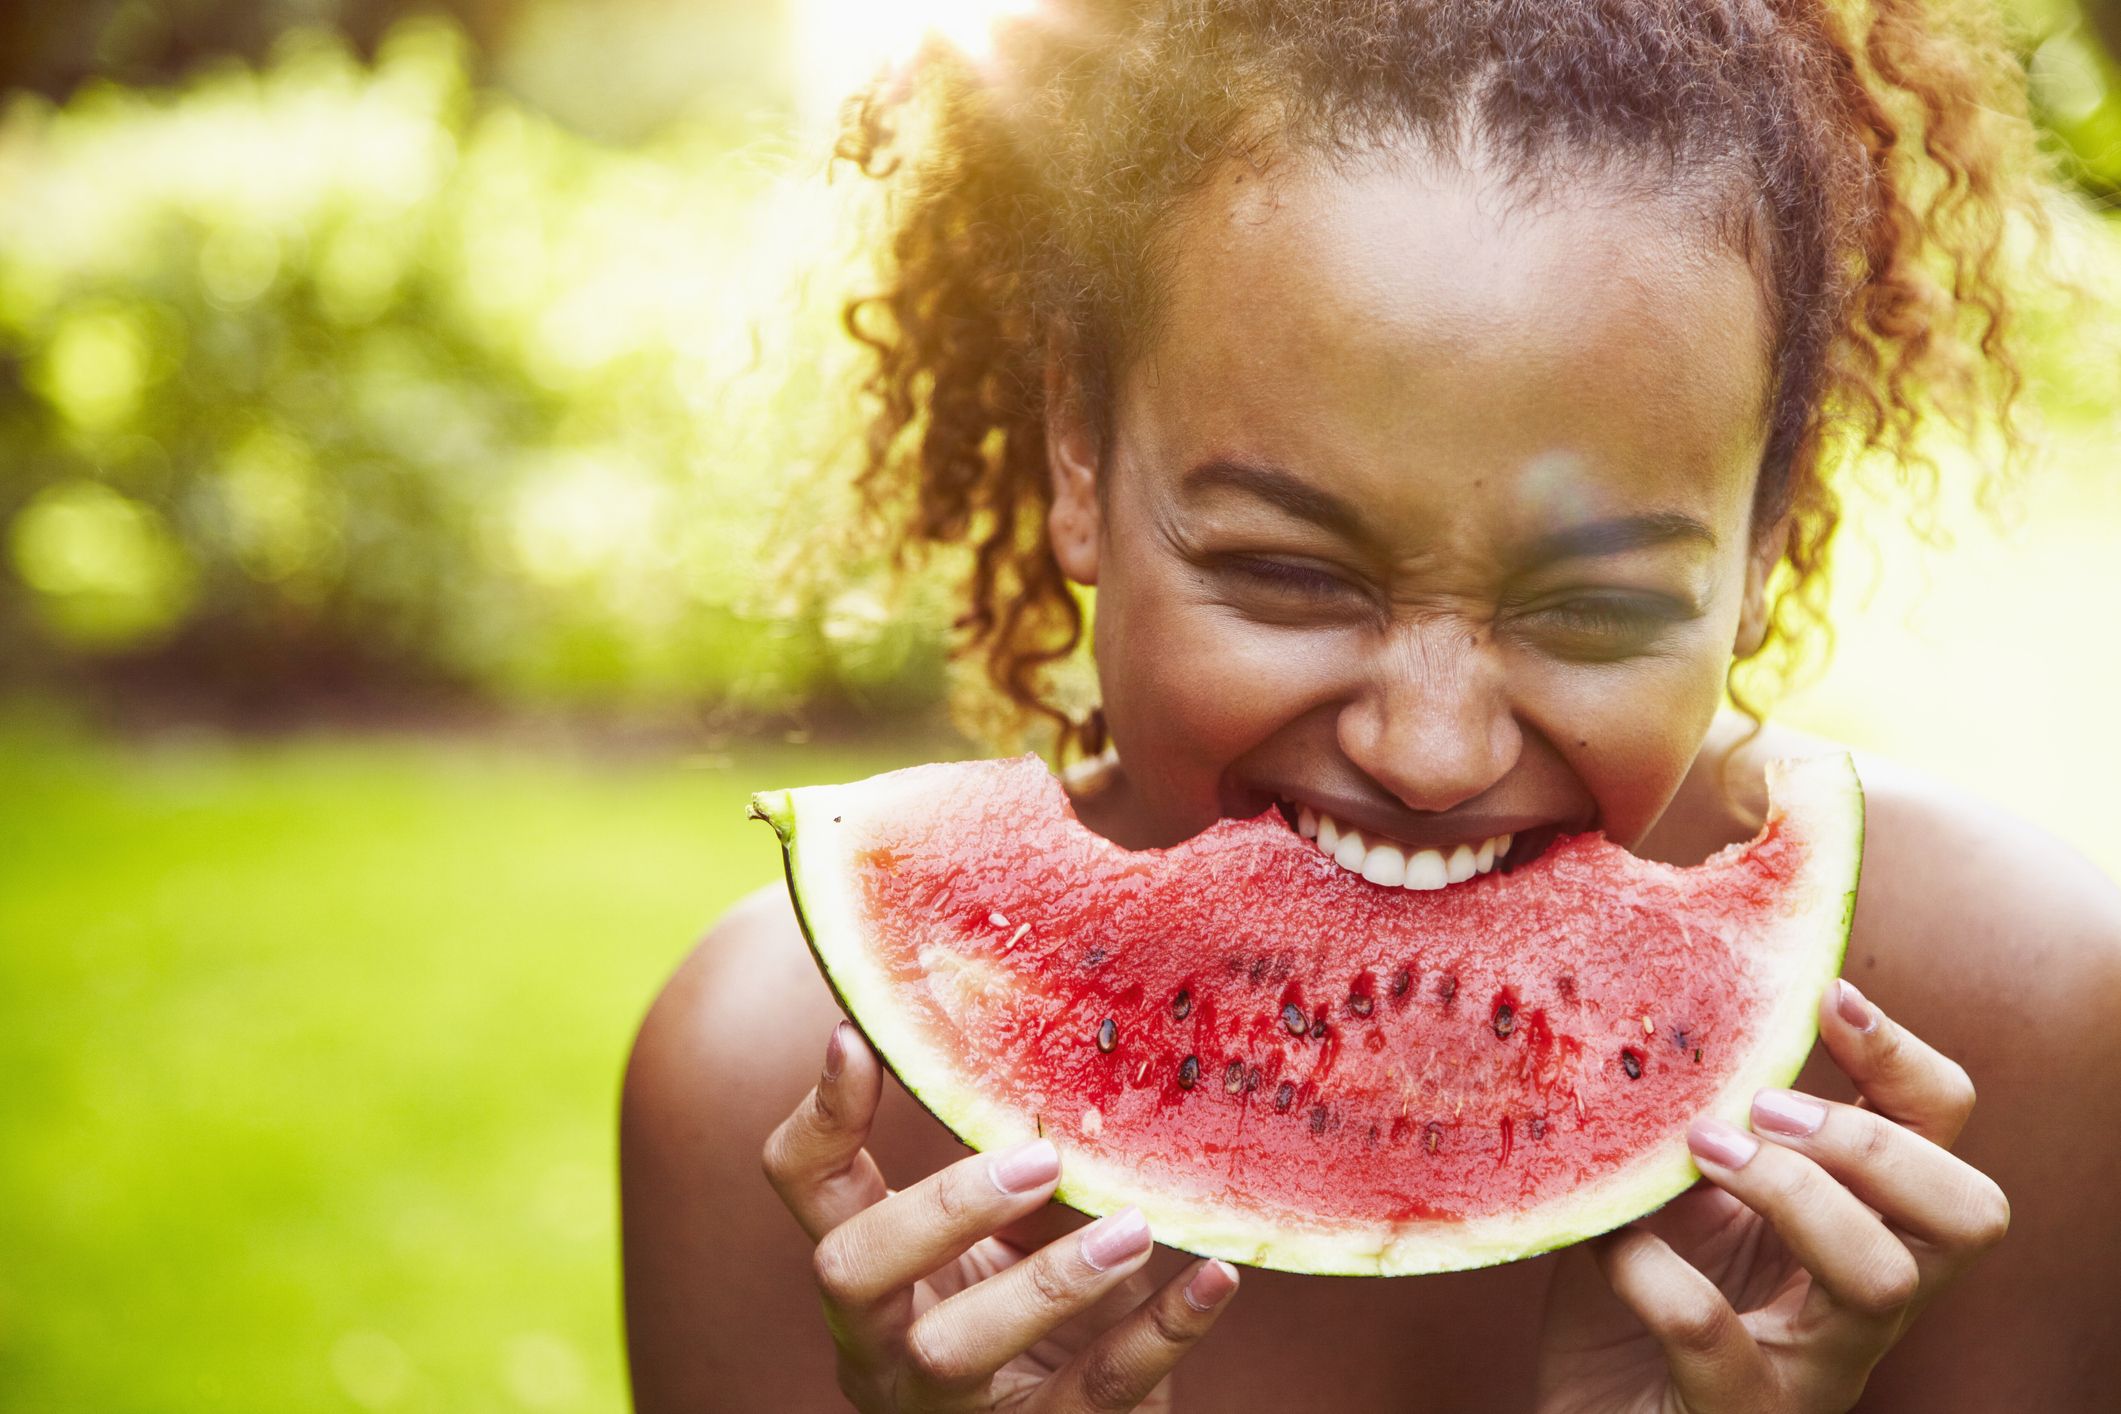 Is Watermelon Keto? How Much You Can Eat It On The Keto Diet